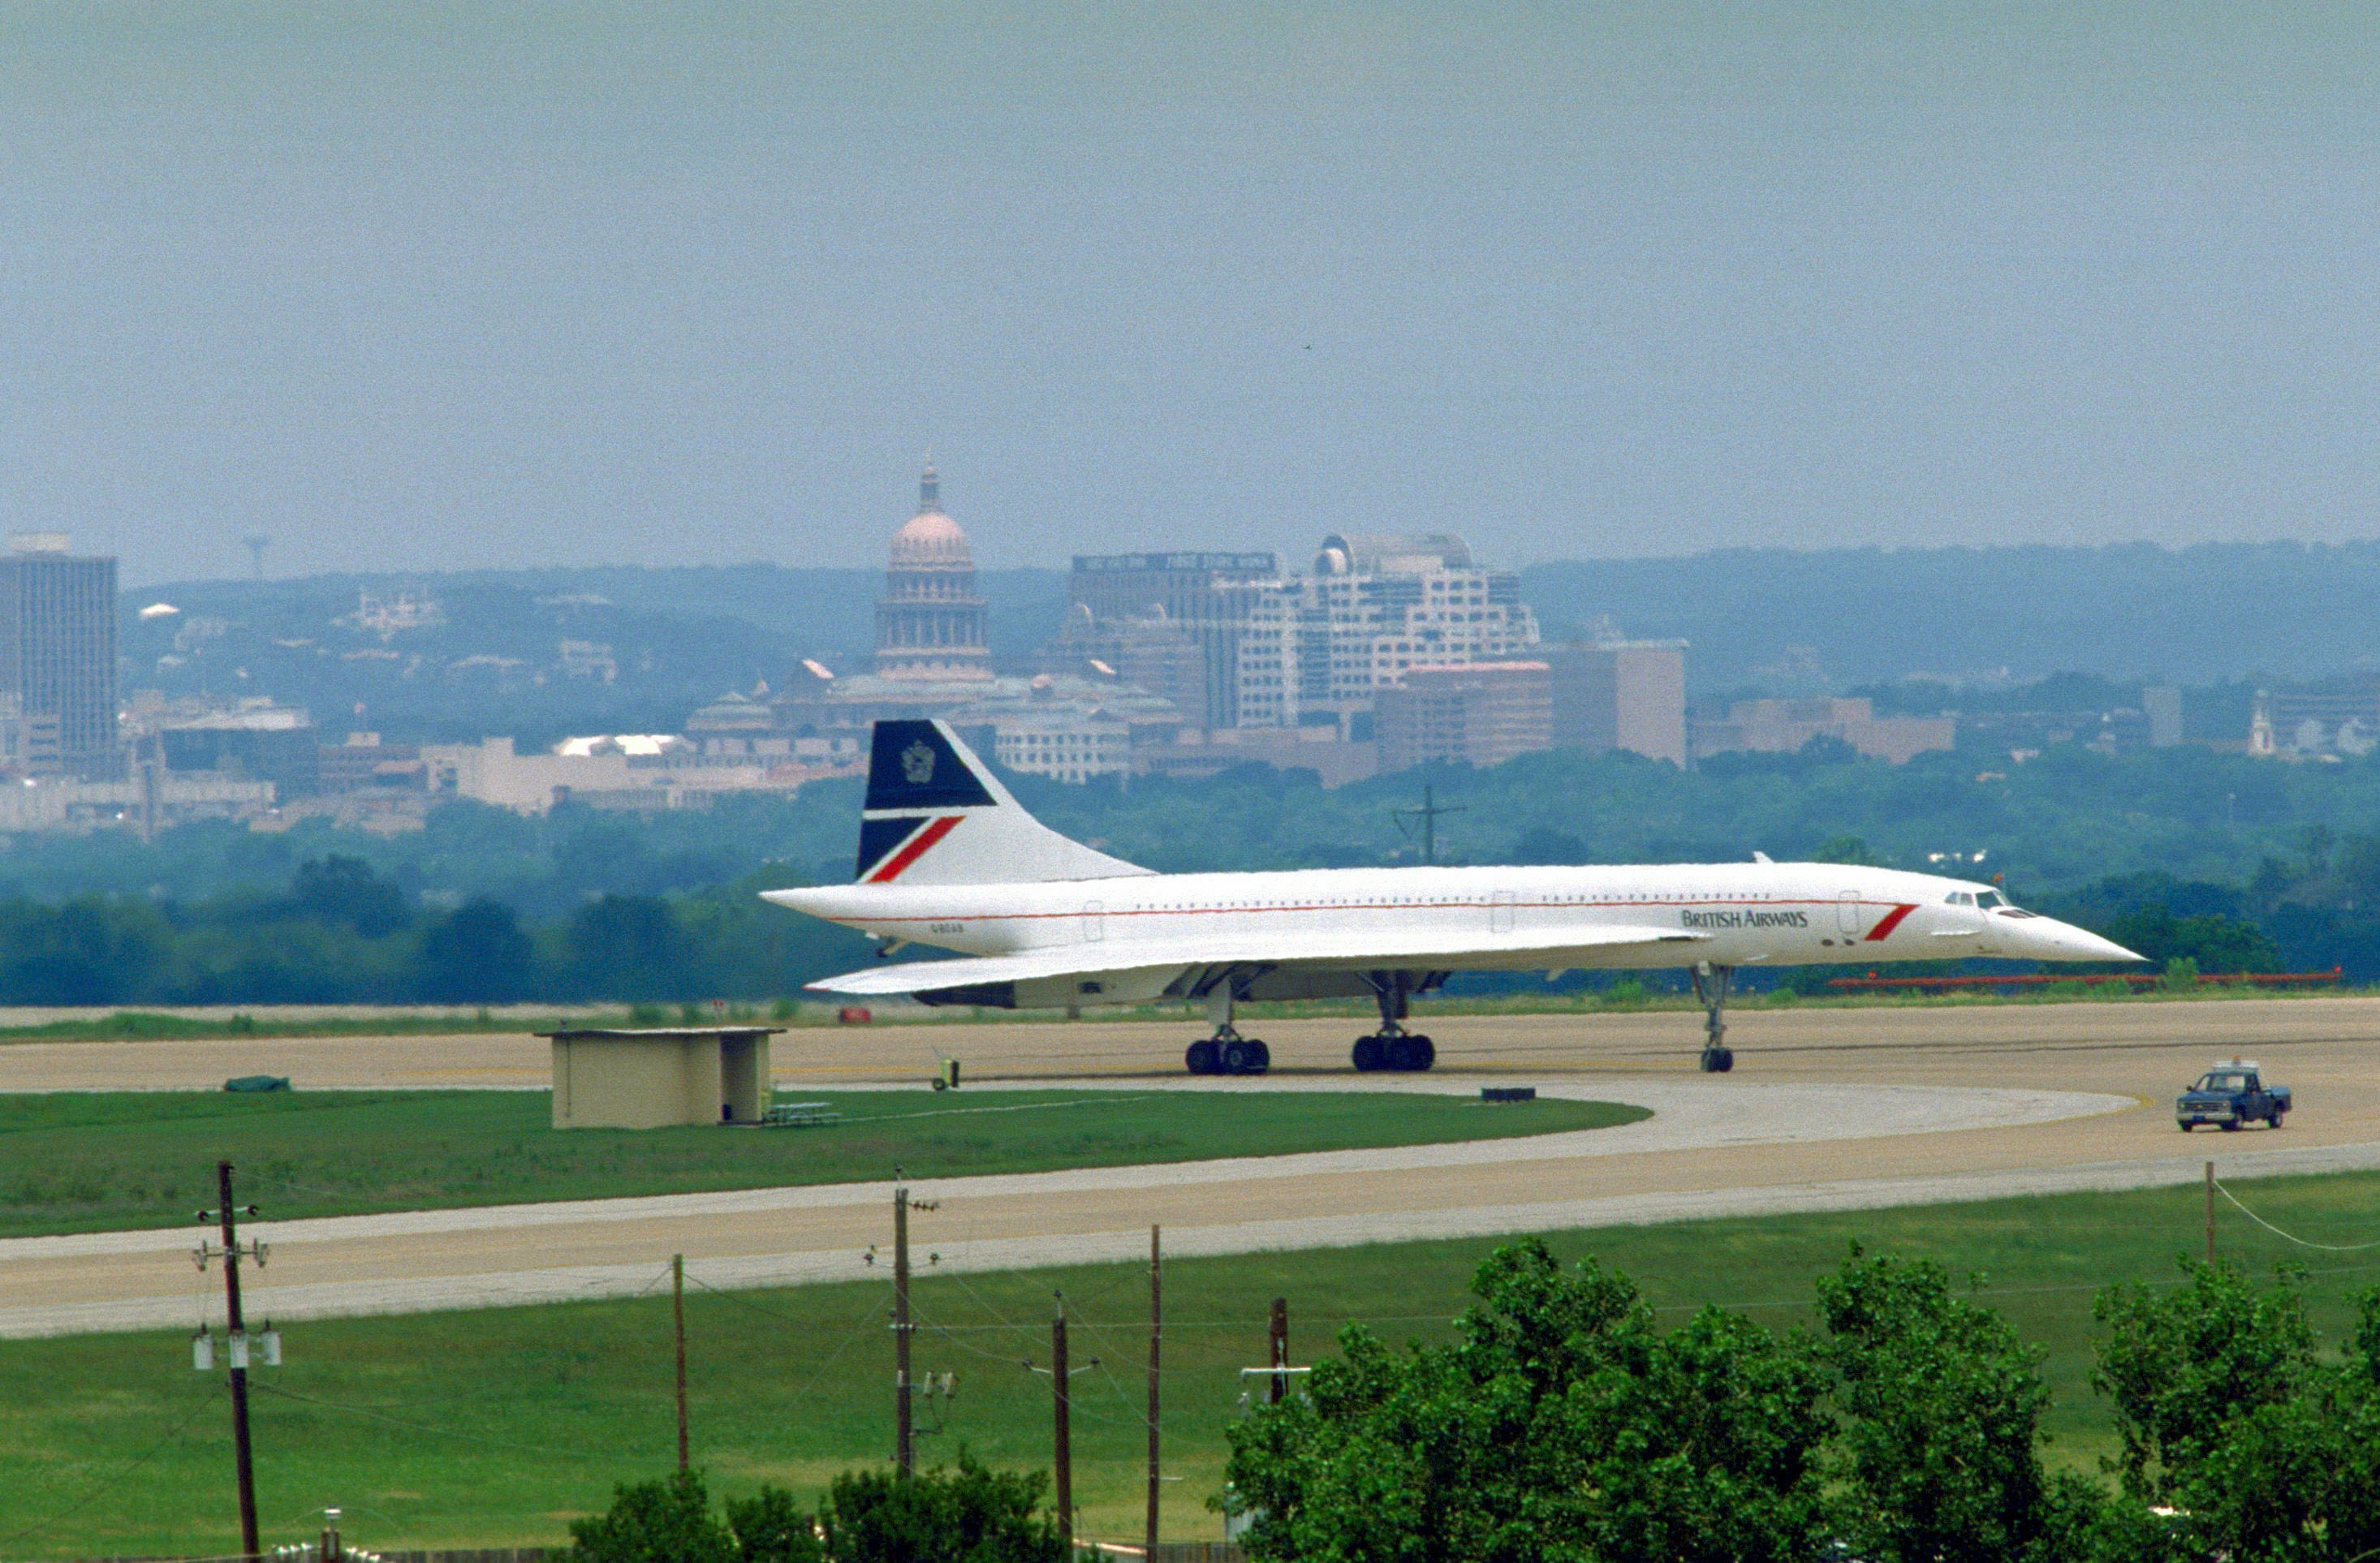 A British Airways Concorde supersonic transport aircraft taxis to a stop upon arrival on base. The plane is carrying England's Queen Elizabeth II and her husband, Prince Philip, Duke of Edinburgh, who are arriving for a royal visit to the United States.